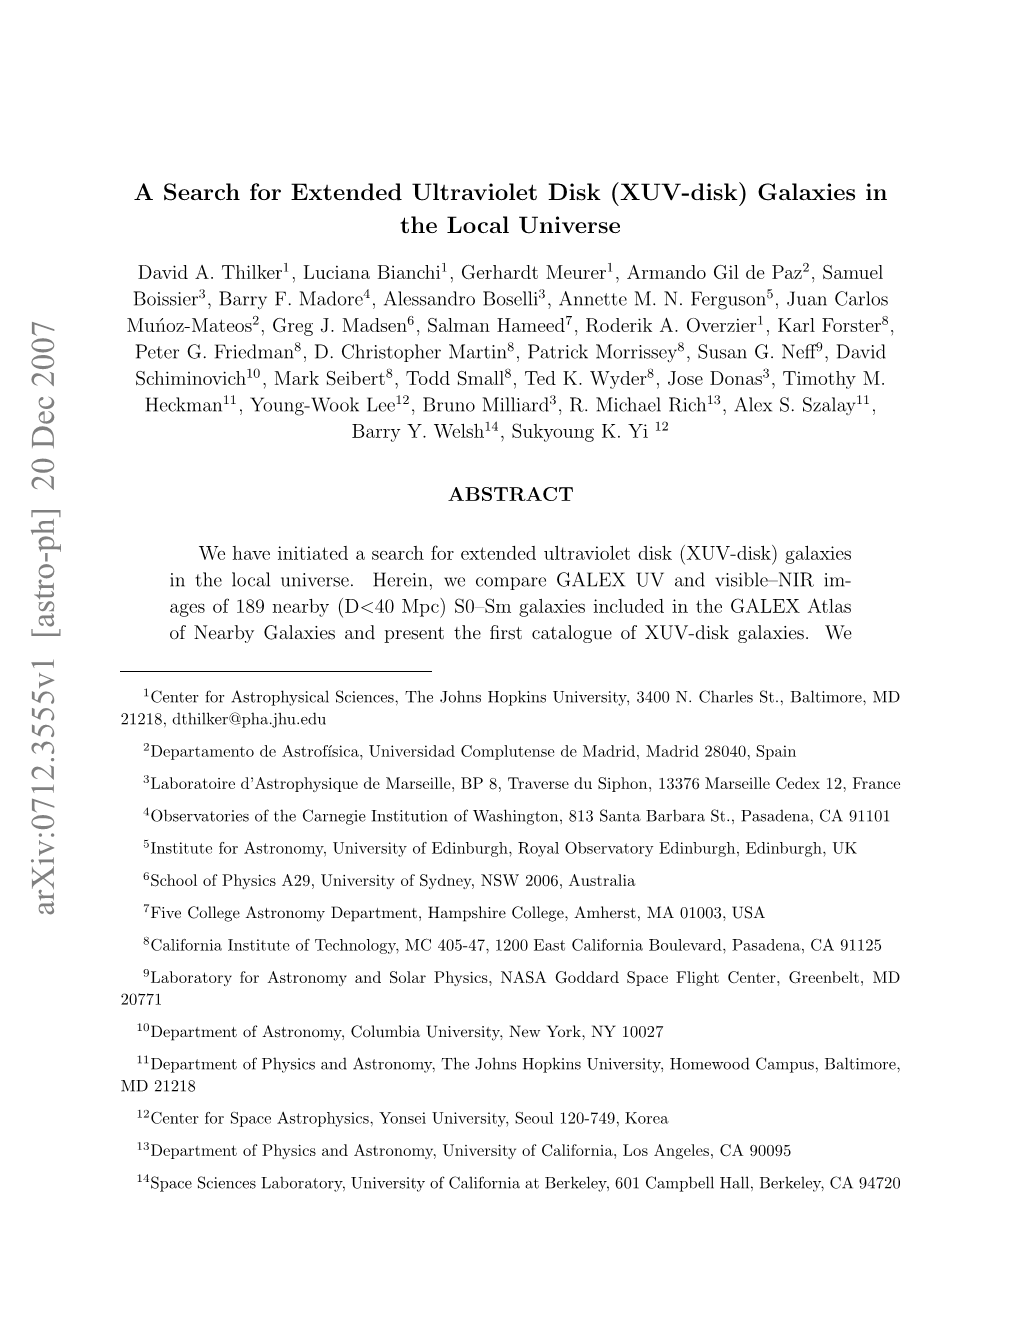 A Search for Extended Ultraviolet Disk (XUV-Disk) Galaxies in the Local